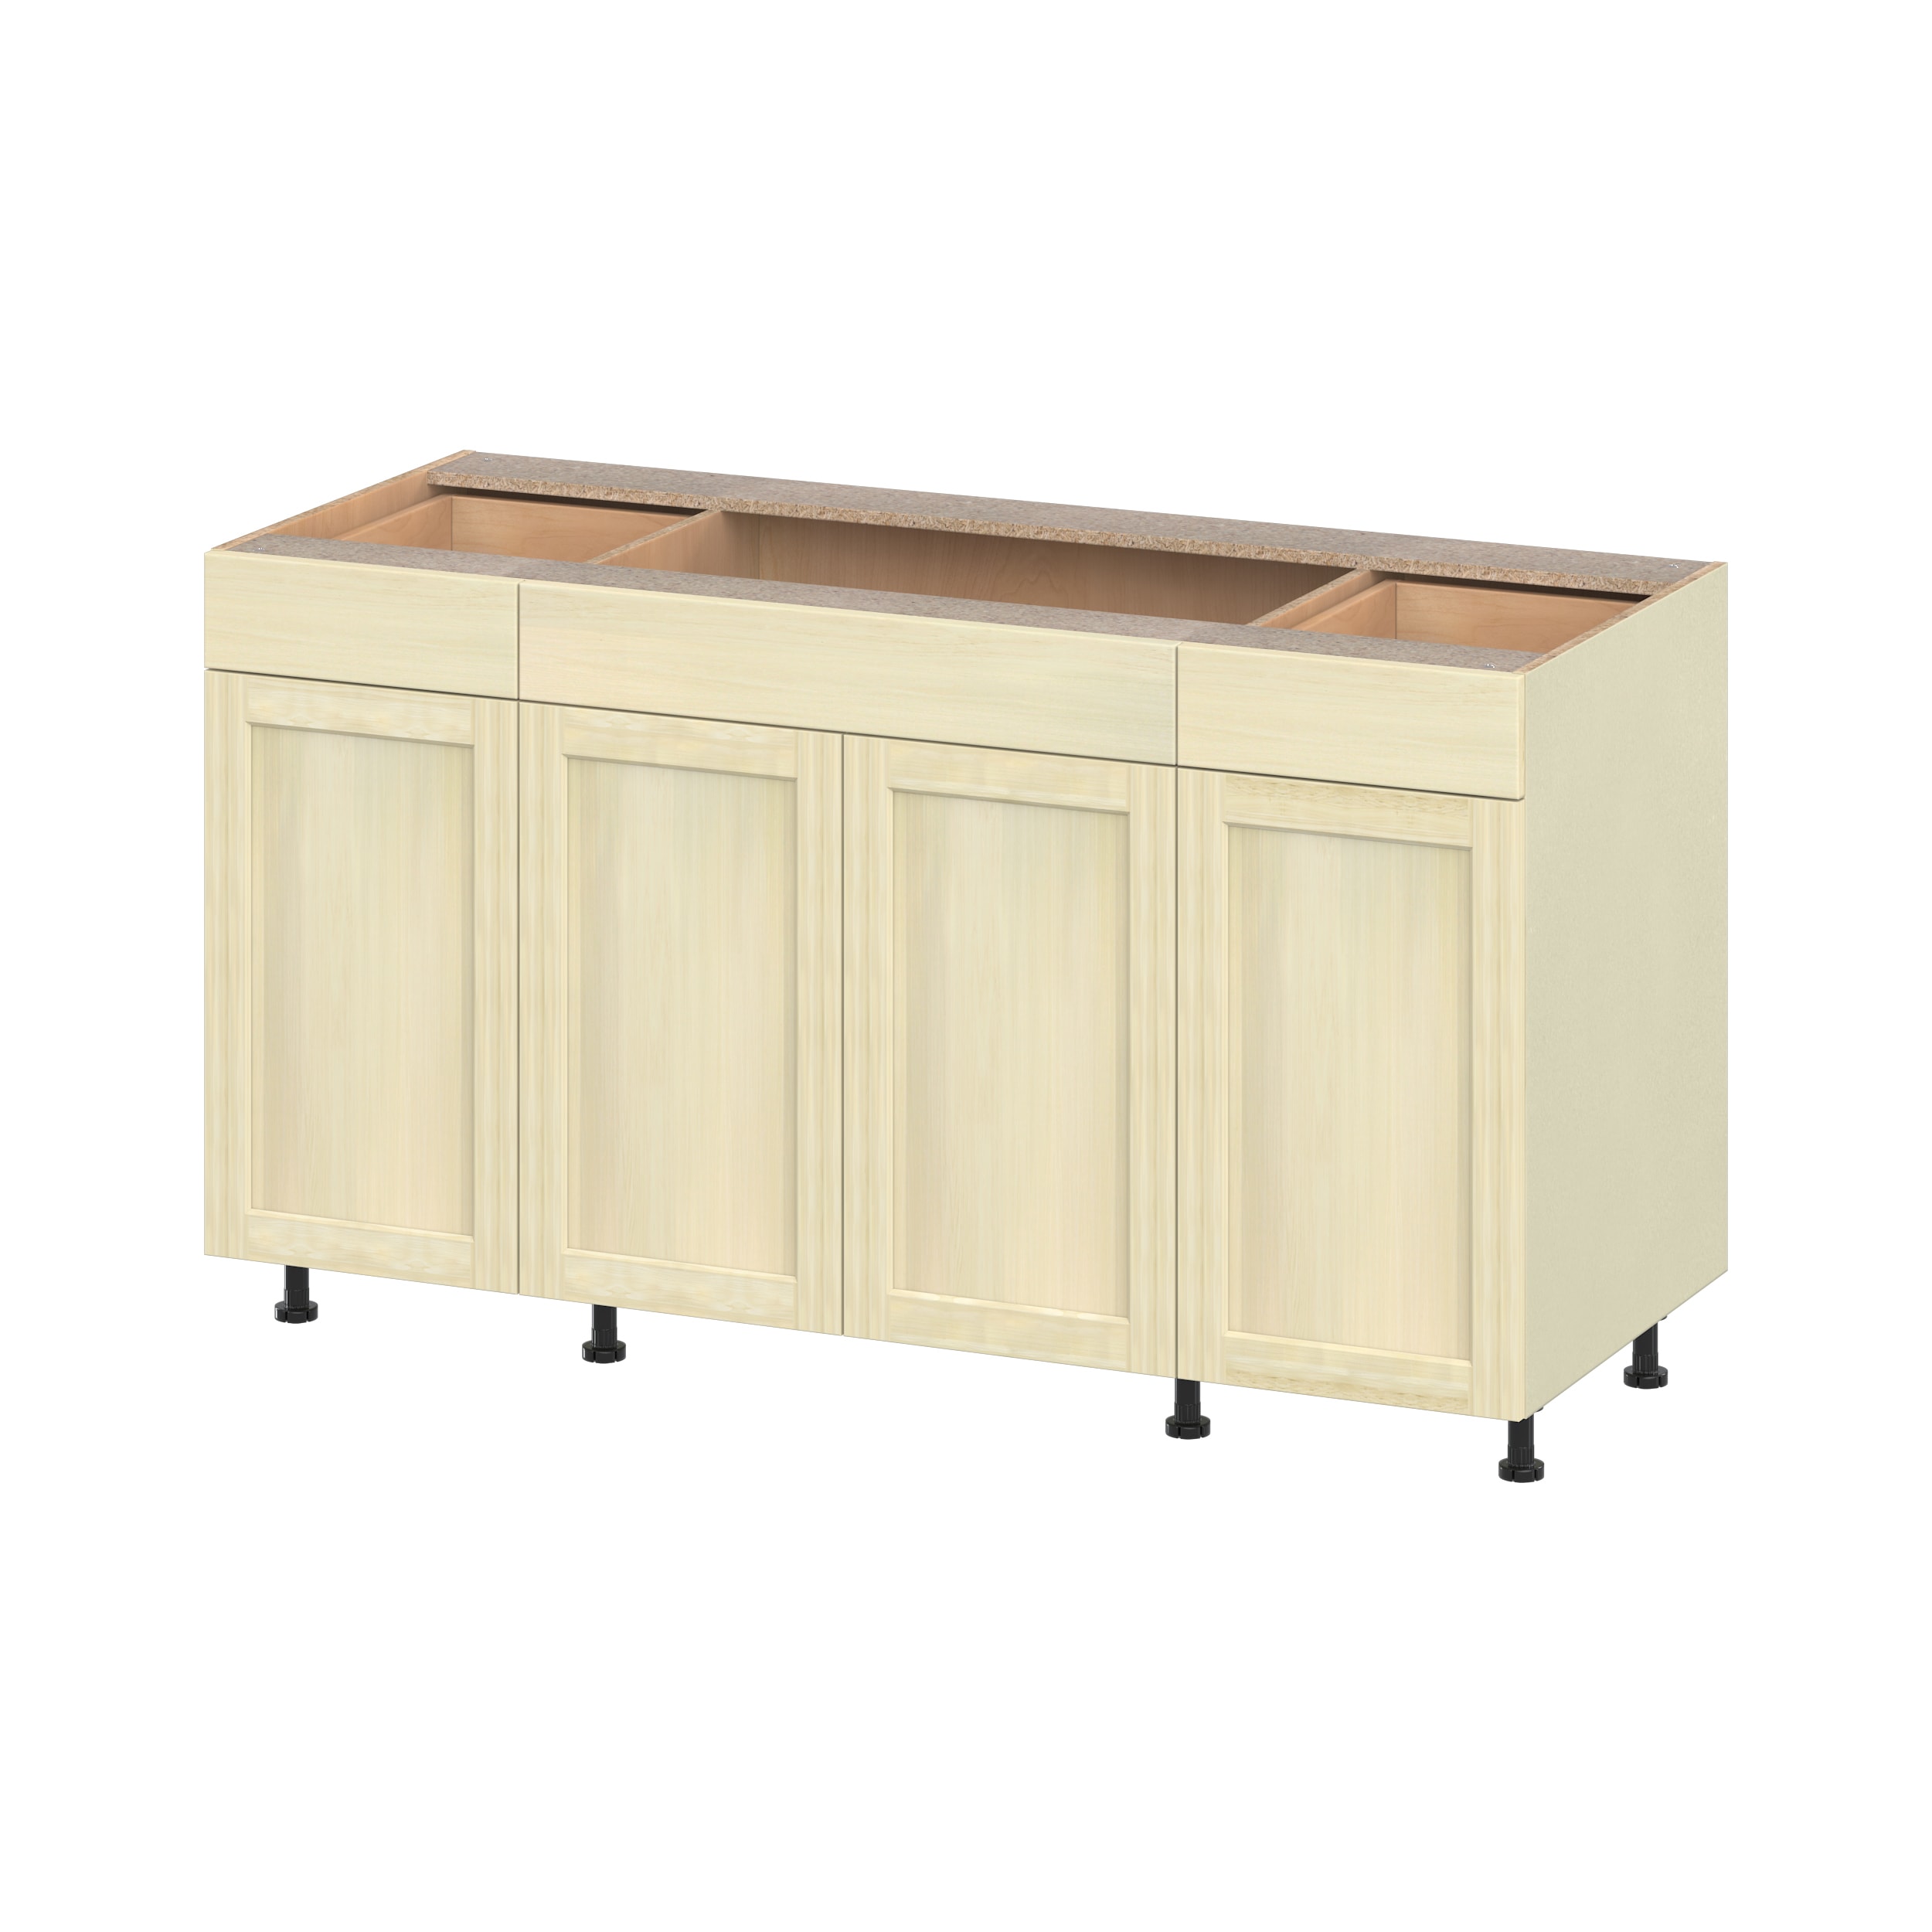 Project Source Omaha Unfinished 60 In W X 34 5 H 24 D Poplar Sink Base Ready To Assemble Cabinet Recessed Panel Shaker Door Style The Kitchen Cabinets Department At Lowes Com